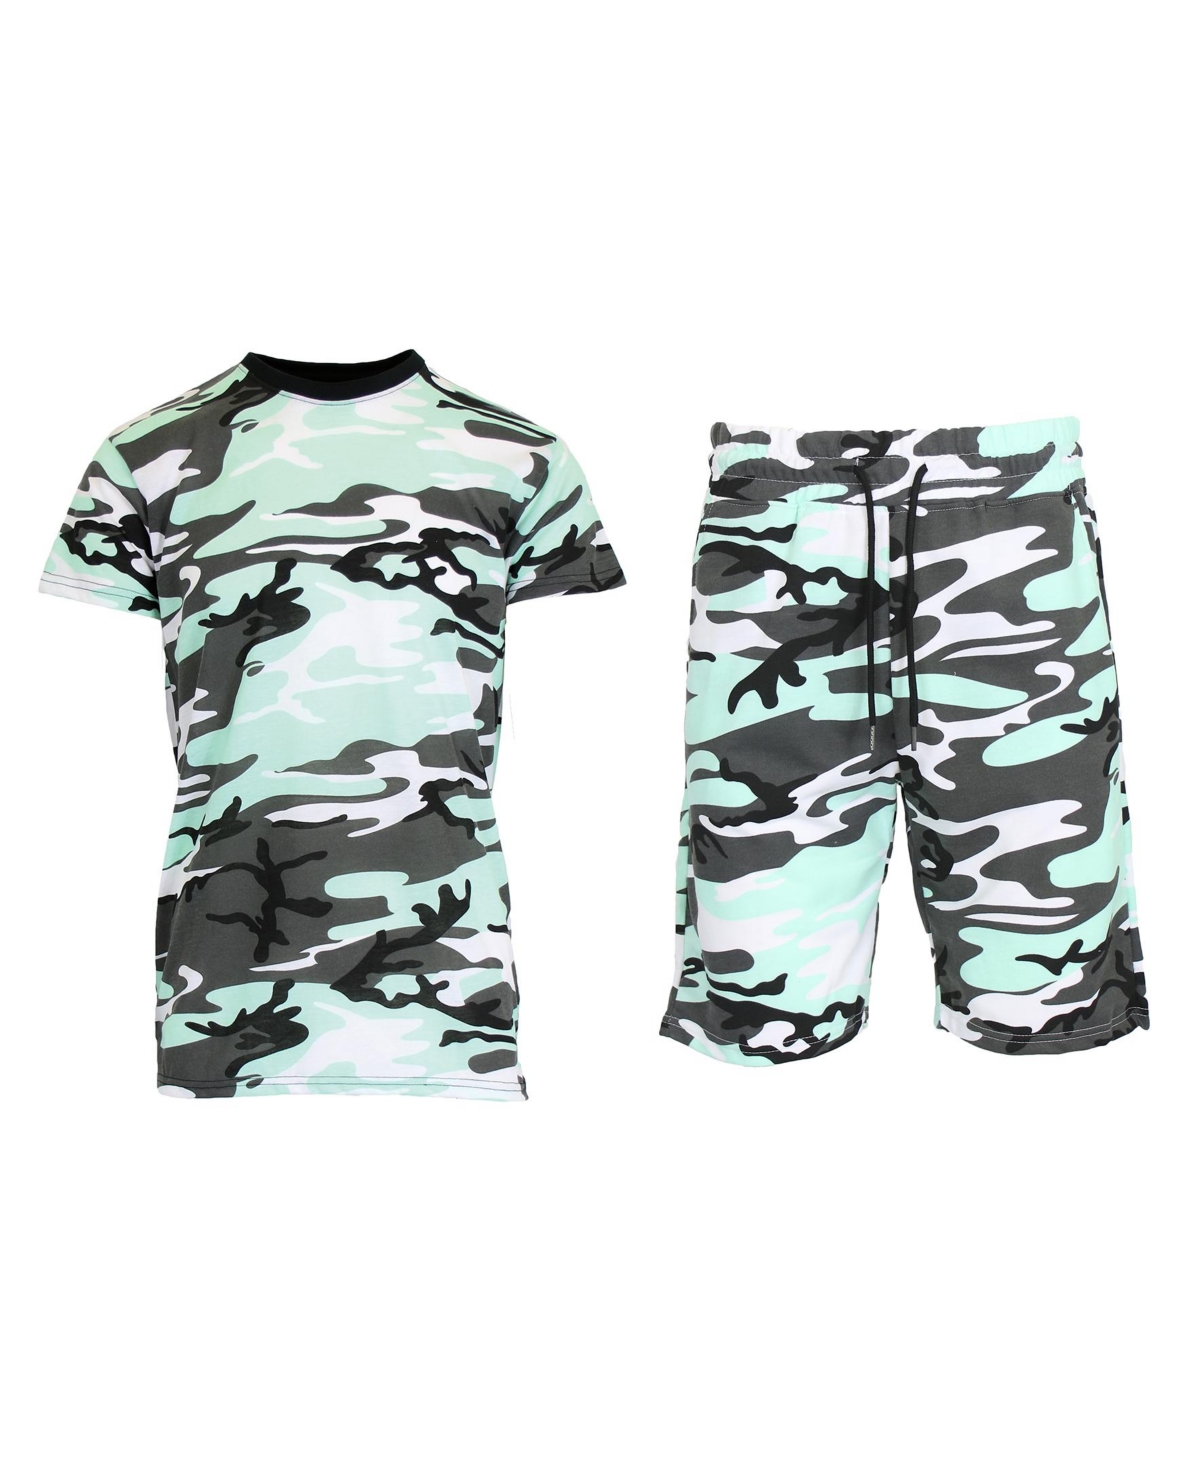 Galaxy By Harvic Men's Camo Short Sleeve T-shirt And Shorts, 2-piece Set In Mint Camo